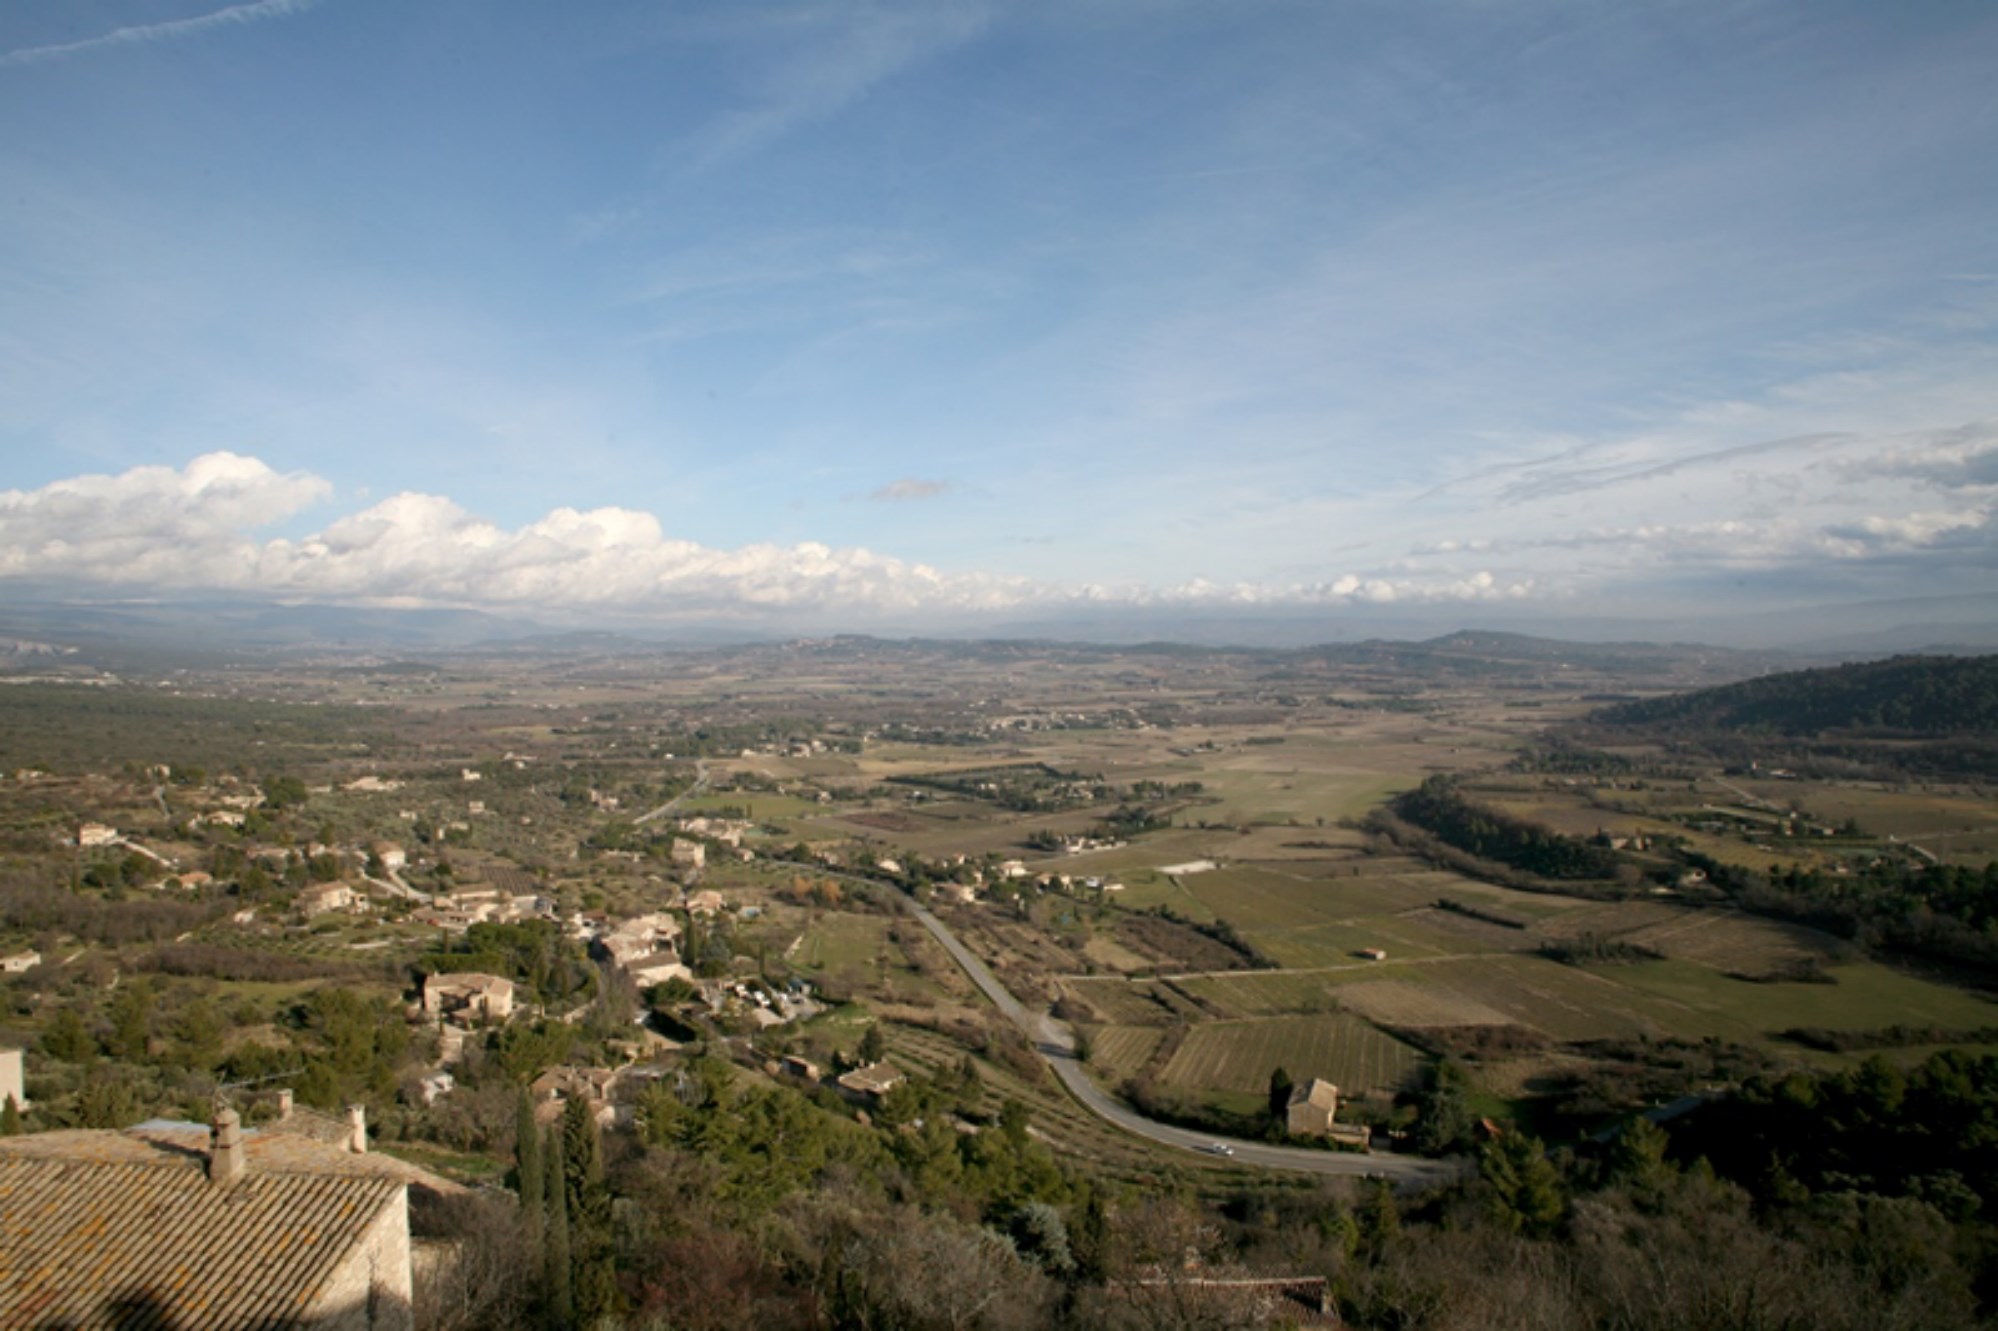 For sale, in Gordes, beautiful village house with terrace and view, possibility to create a shop